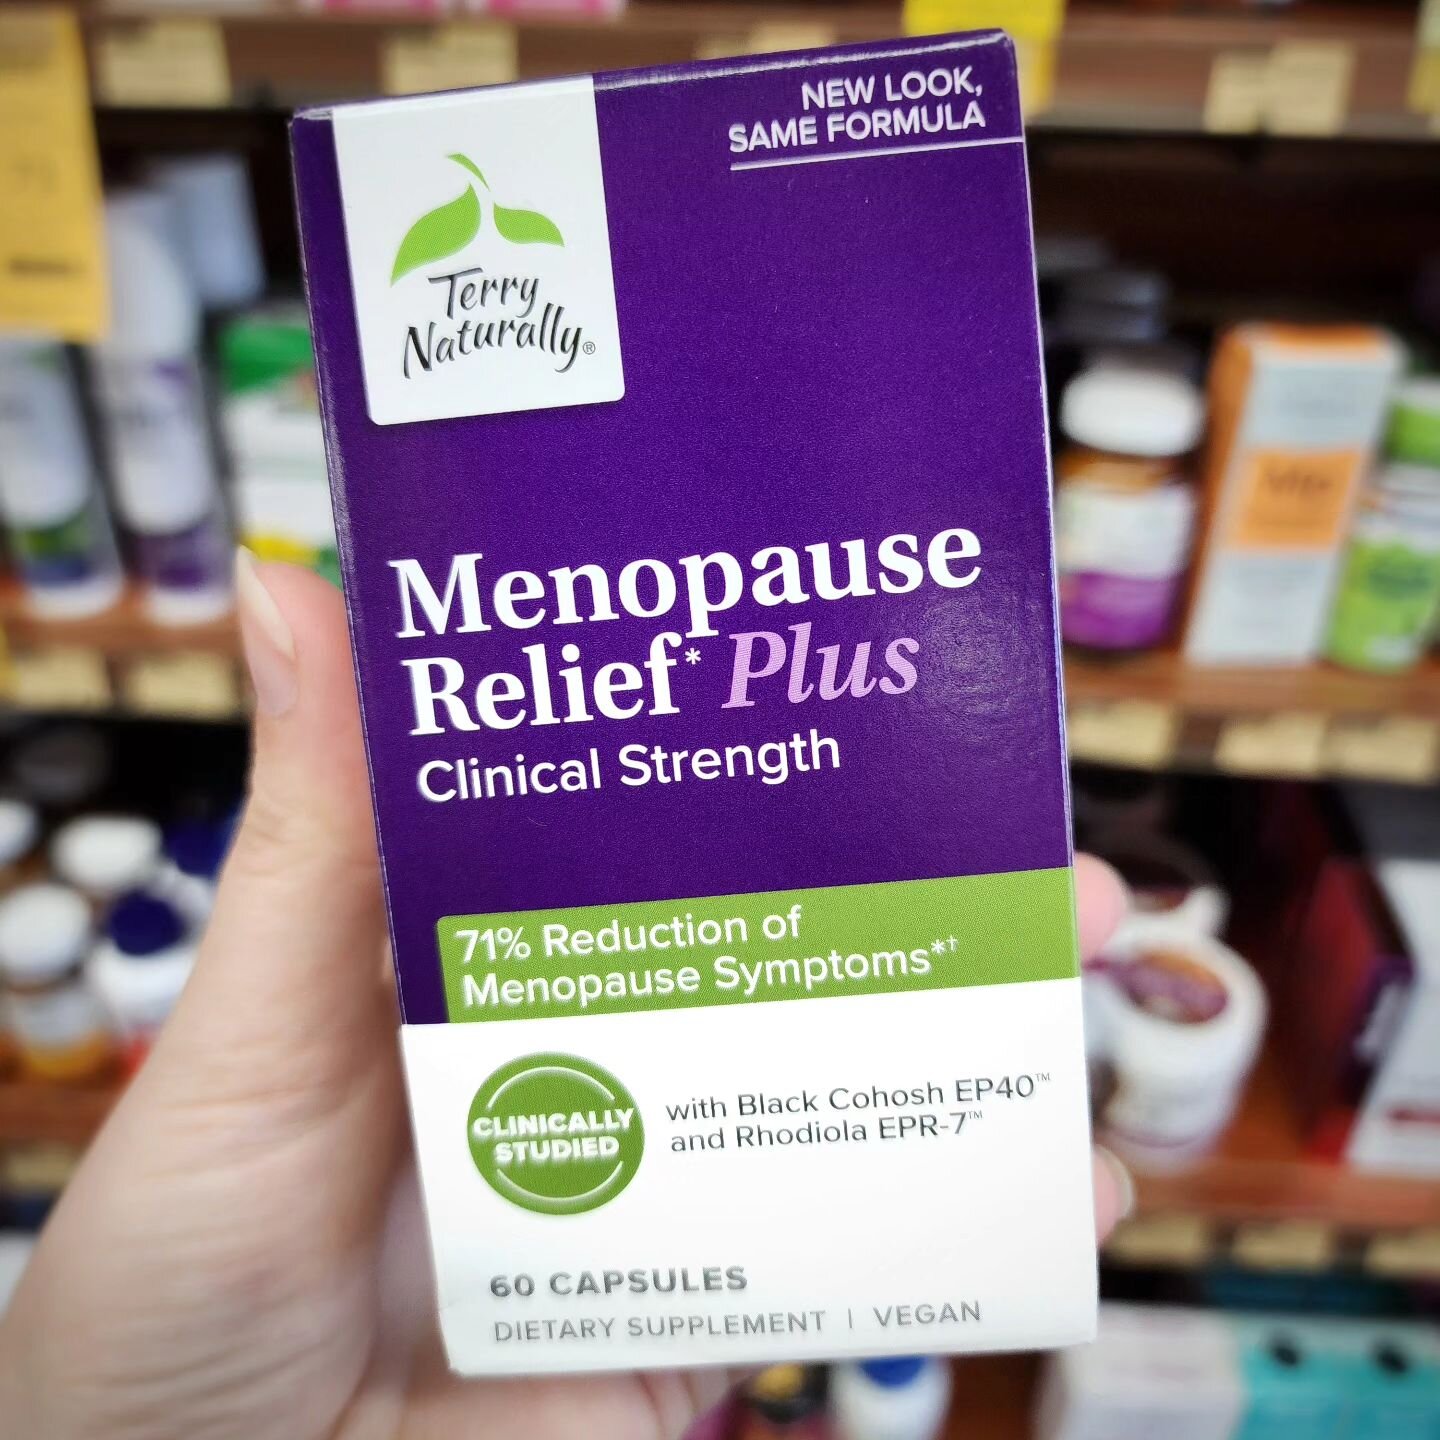 Menopause Relief Plus is a welcome alternative to Hormone Replacement Therapy (HRT) for menopausal symptoms.*

💥Relieves hot flashes
💥Helps stop night sweats
💥Reduces occasional restless sleep
💥Reduces irritability
💥Relieves stress^
💥Reduces fa